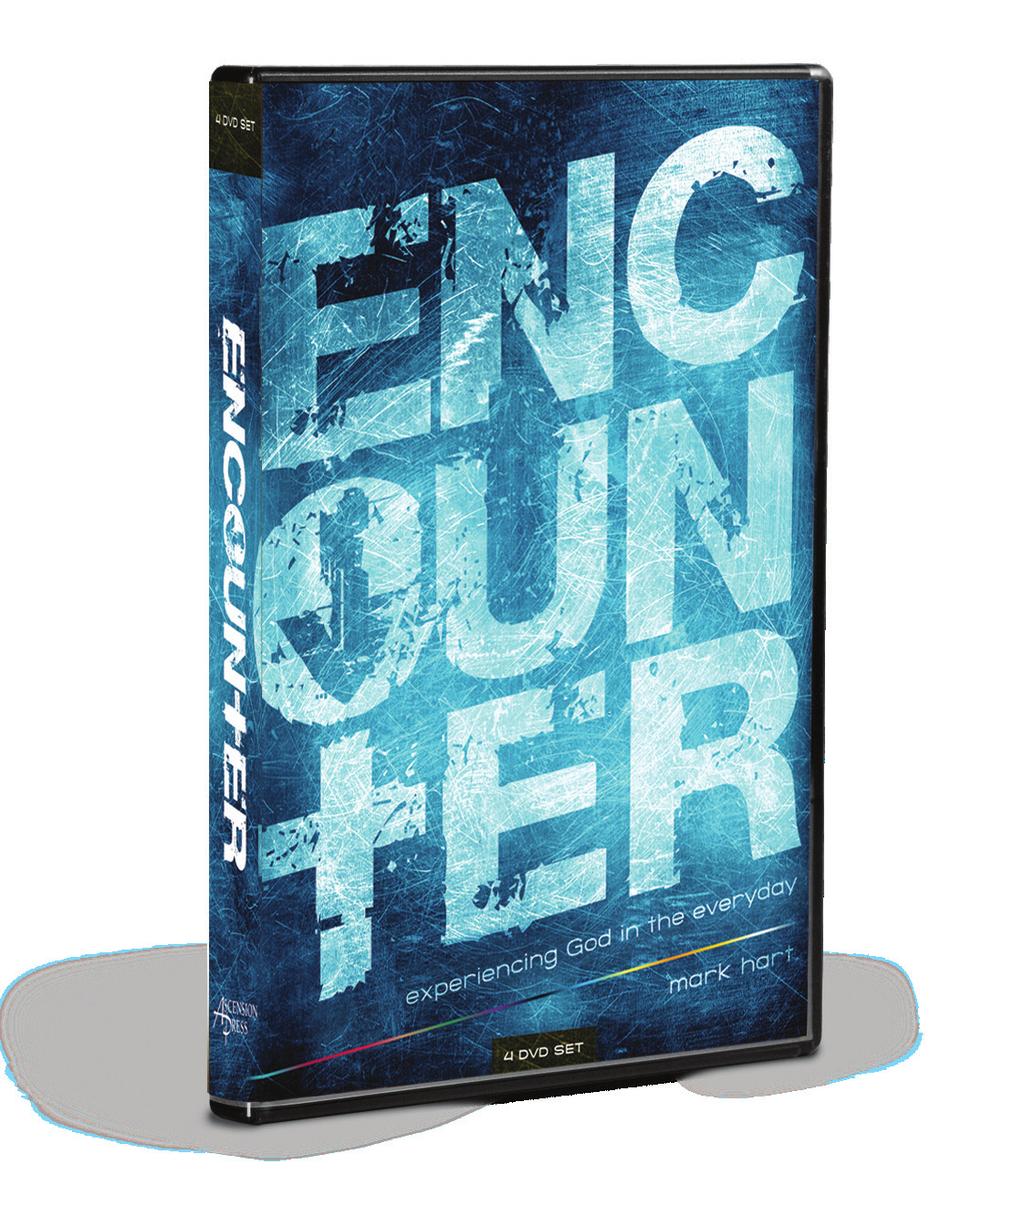 New Release encounter Encounter Experiencing God in the Everyday An Eight-Part Bible Study Program for Middle School Presented by Mark Hart When you think of the average middle-schooler, you probably